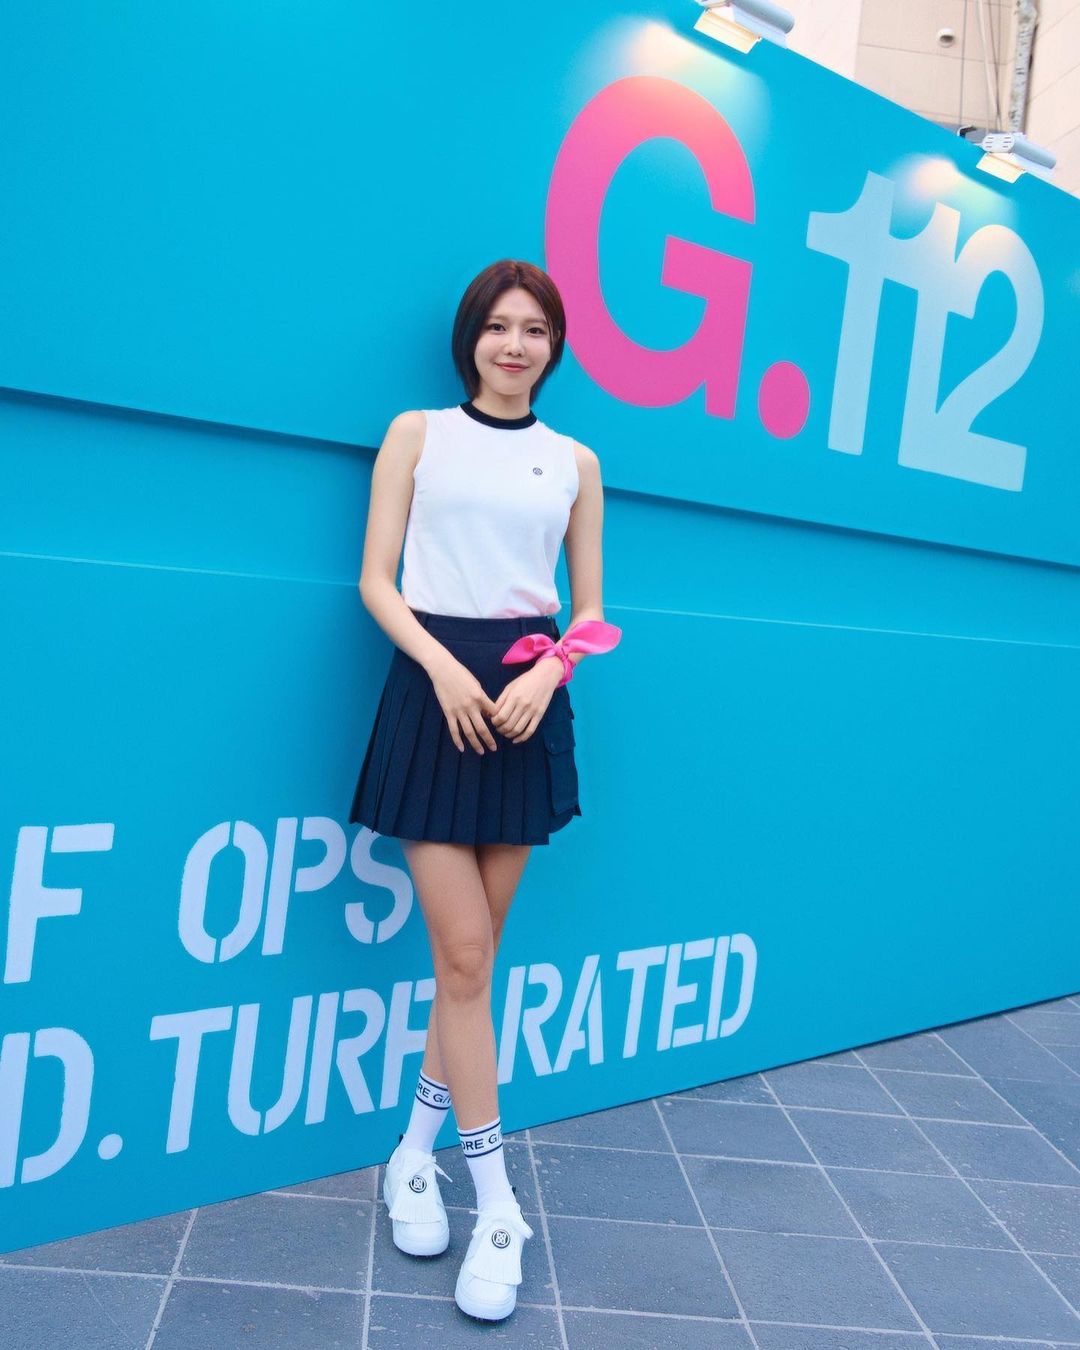 Choi Soo-young, beautiful legs revealed in a tennis skirt